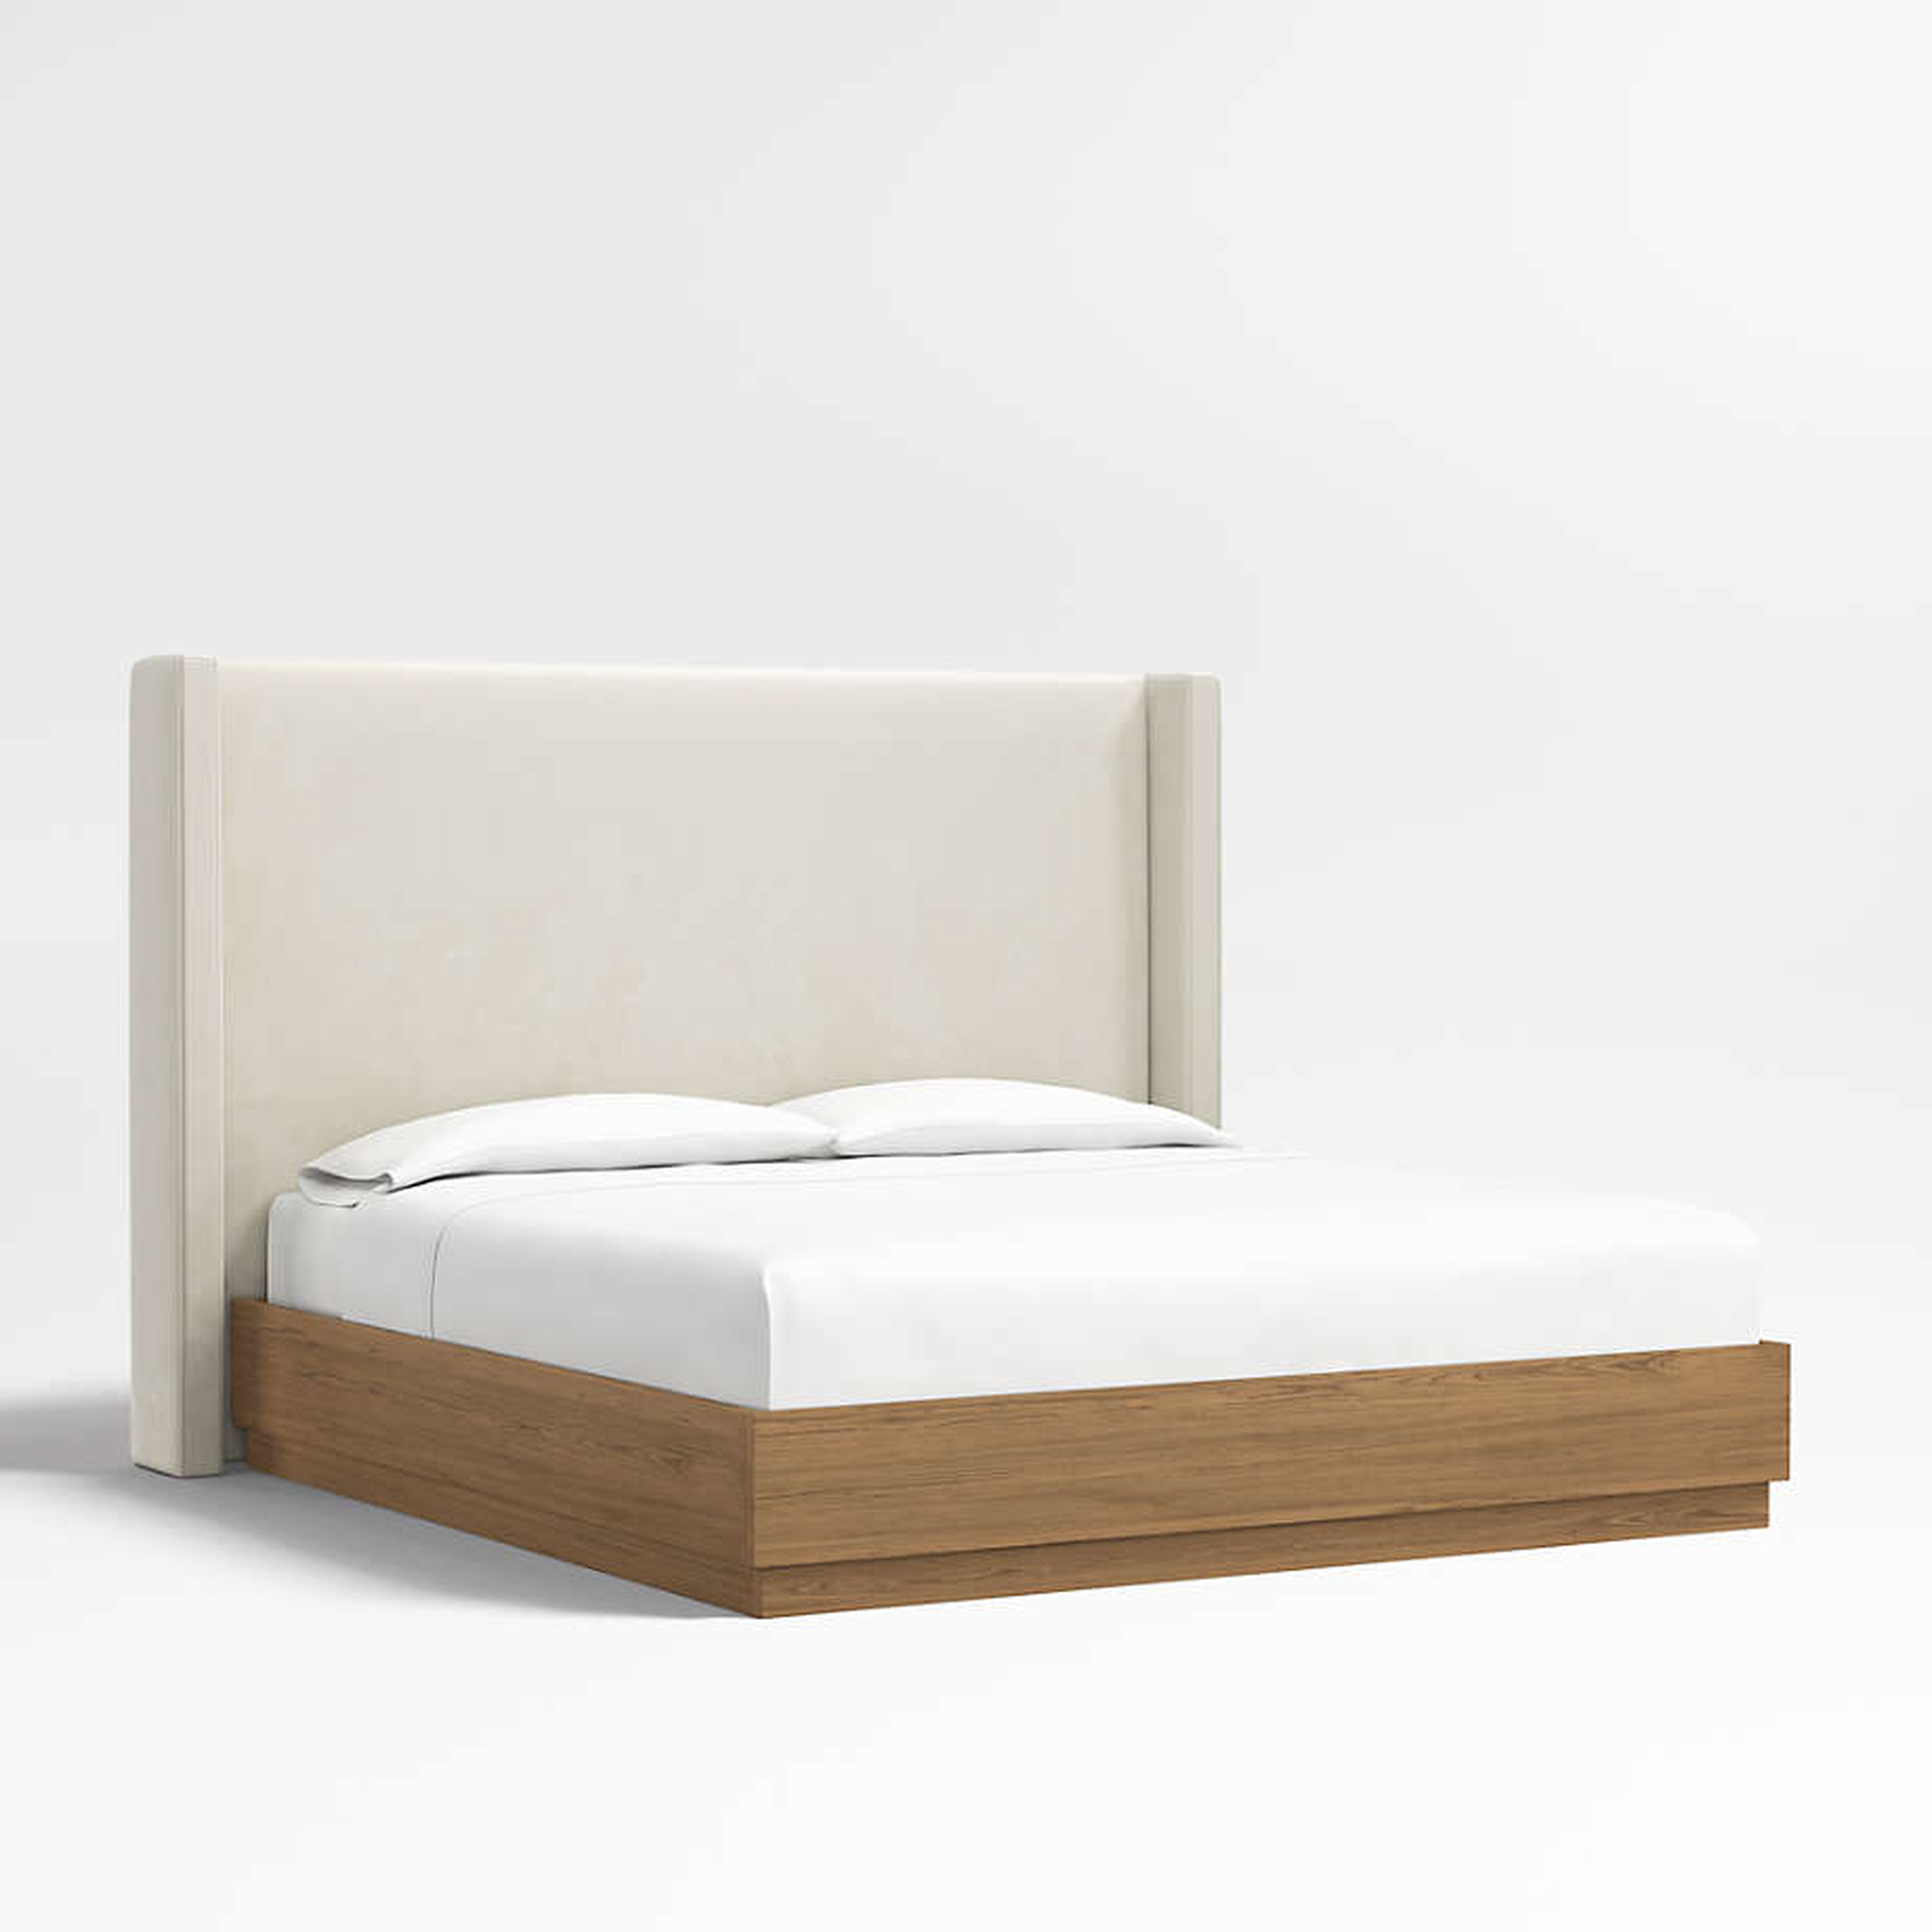 Arden 60" Beige Upholstered King Headboard with Batten Brown Oak Bed Base *CLEARANCE* - Crate and Barrel